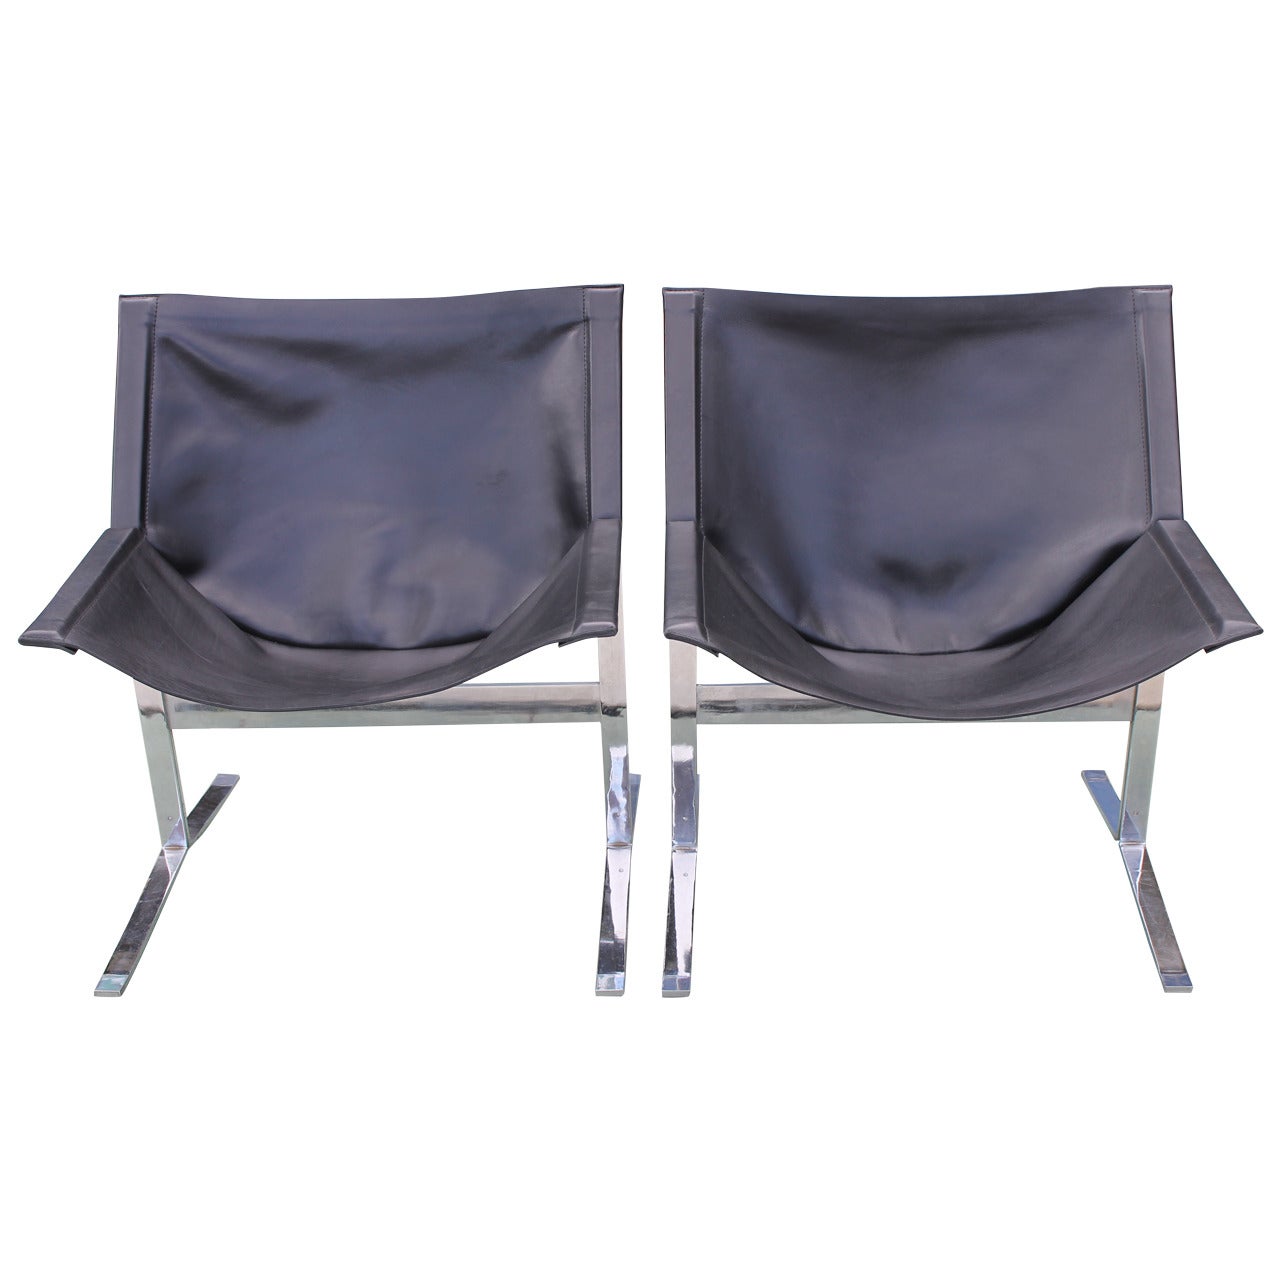 Chairs by Clement Meadmore